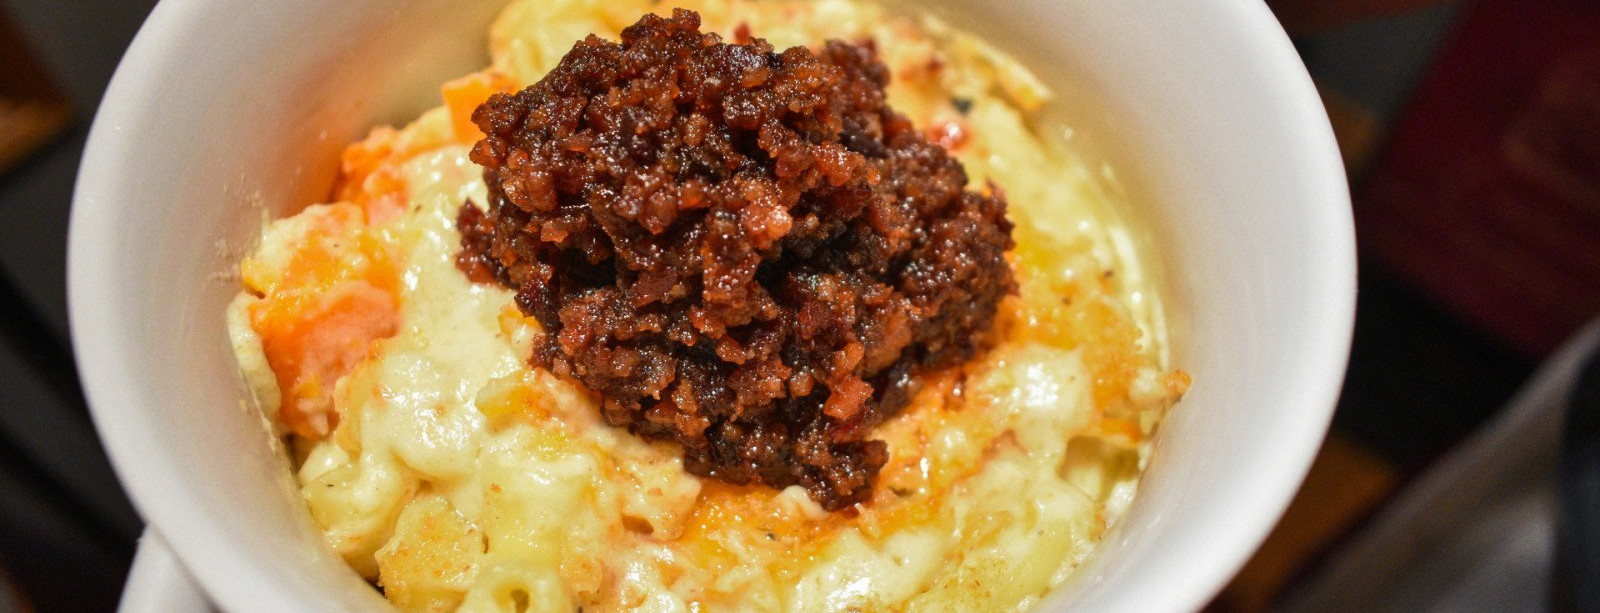 Mac & Cheese with Bacon Jam